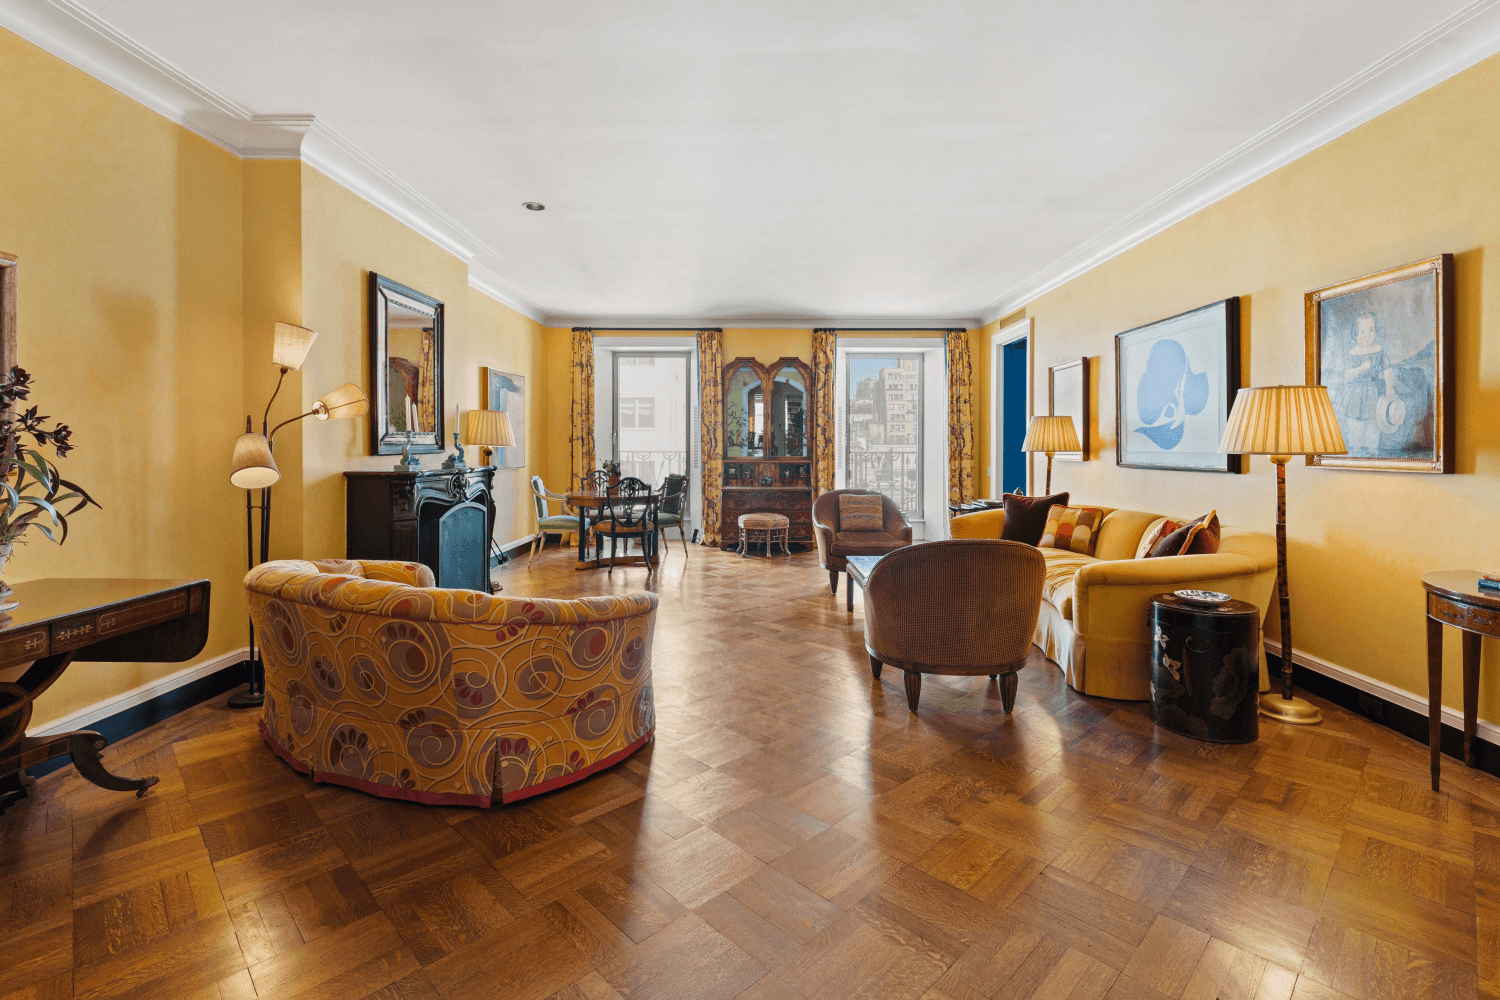 Pre war sun washed 11 Room Apartment with City Views unique to the high floor Apartments in this prestigious UES building.